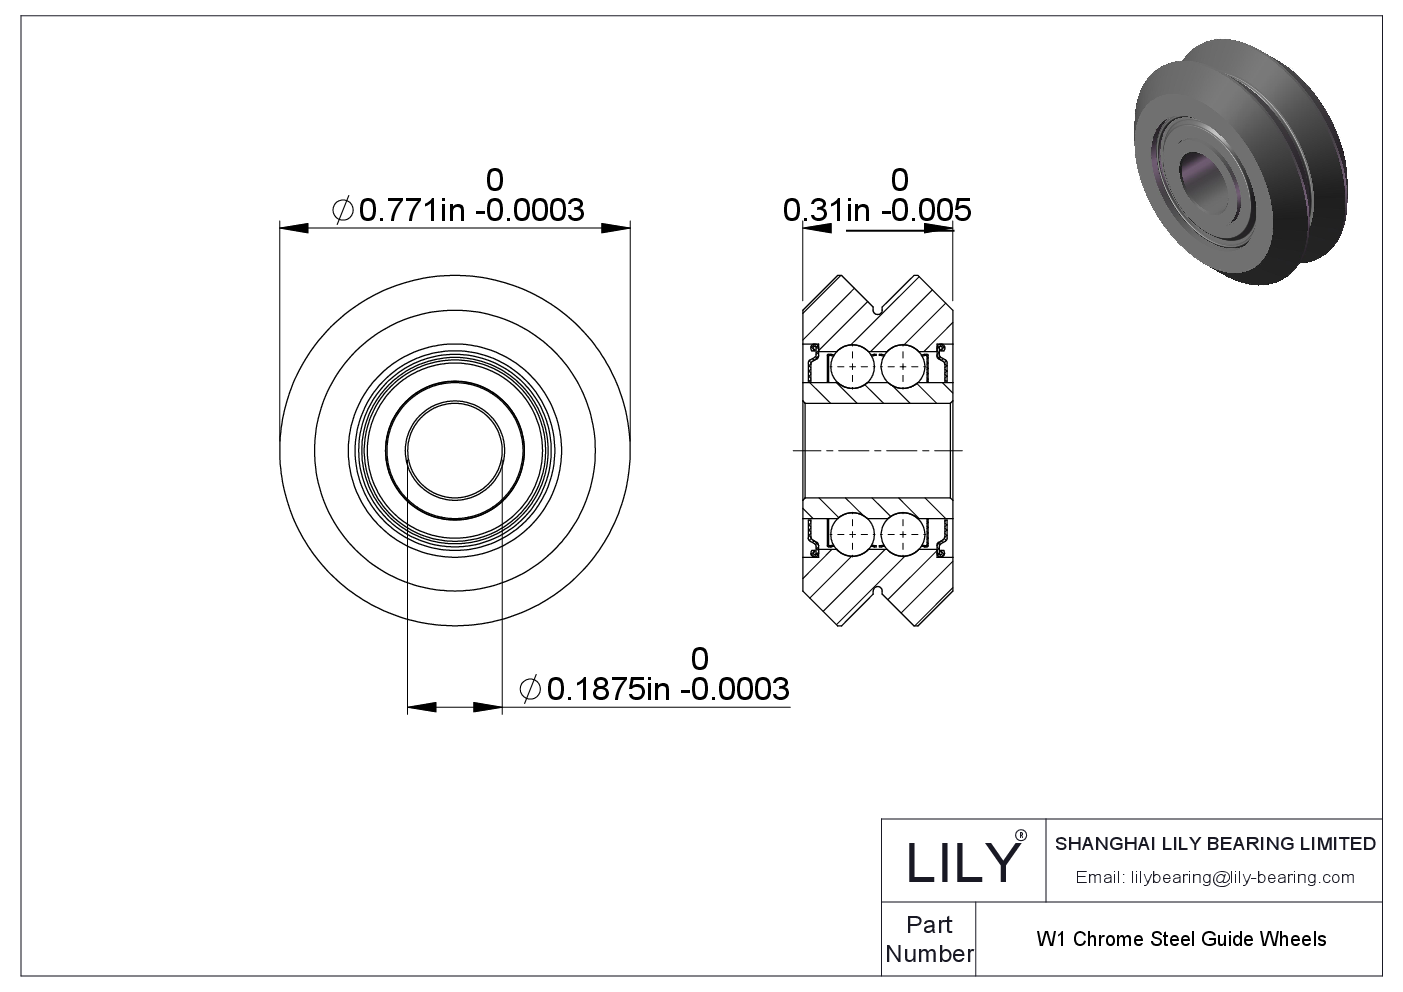 W1 Chrome Steel Guide Wheels cad drawing